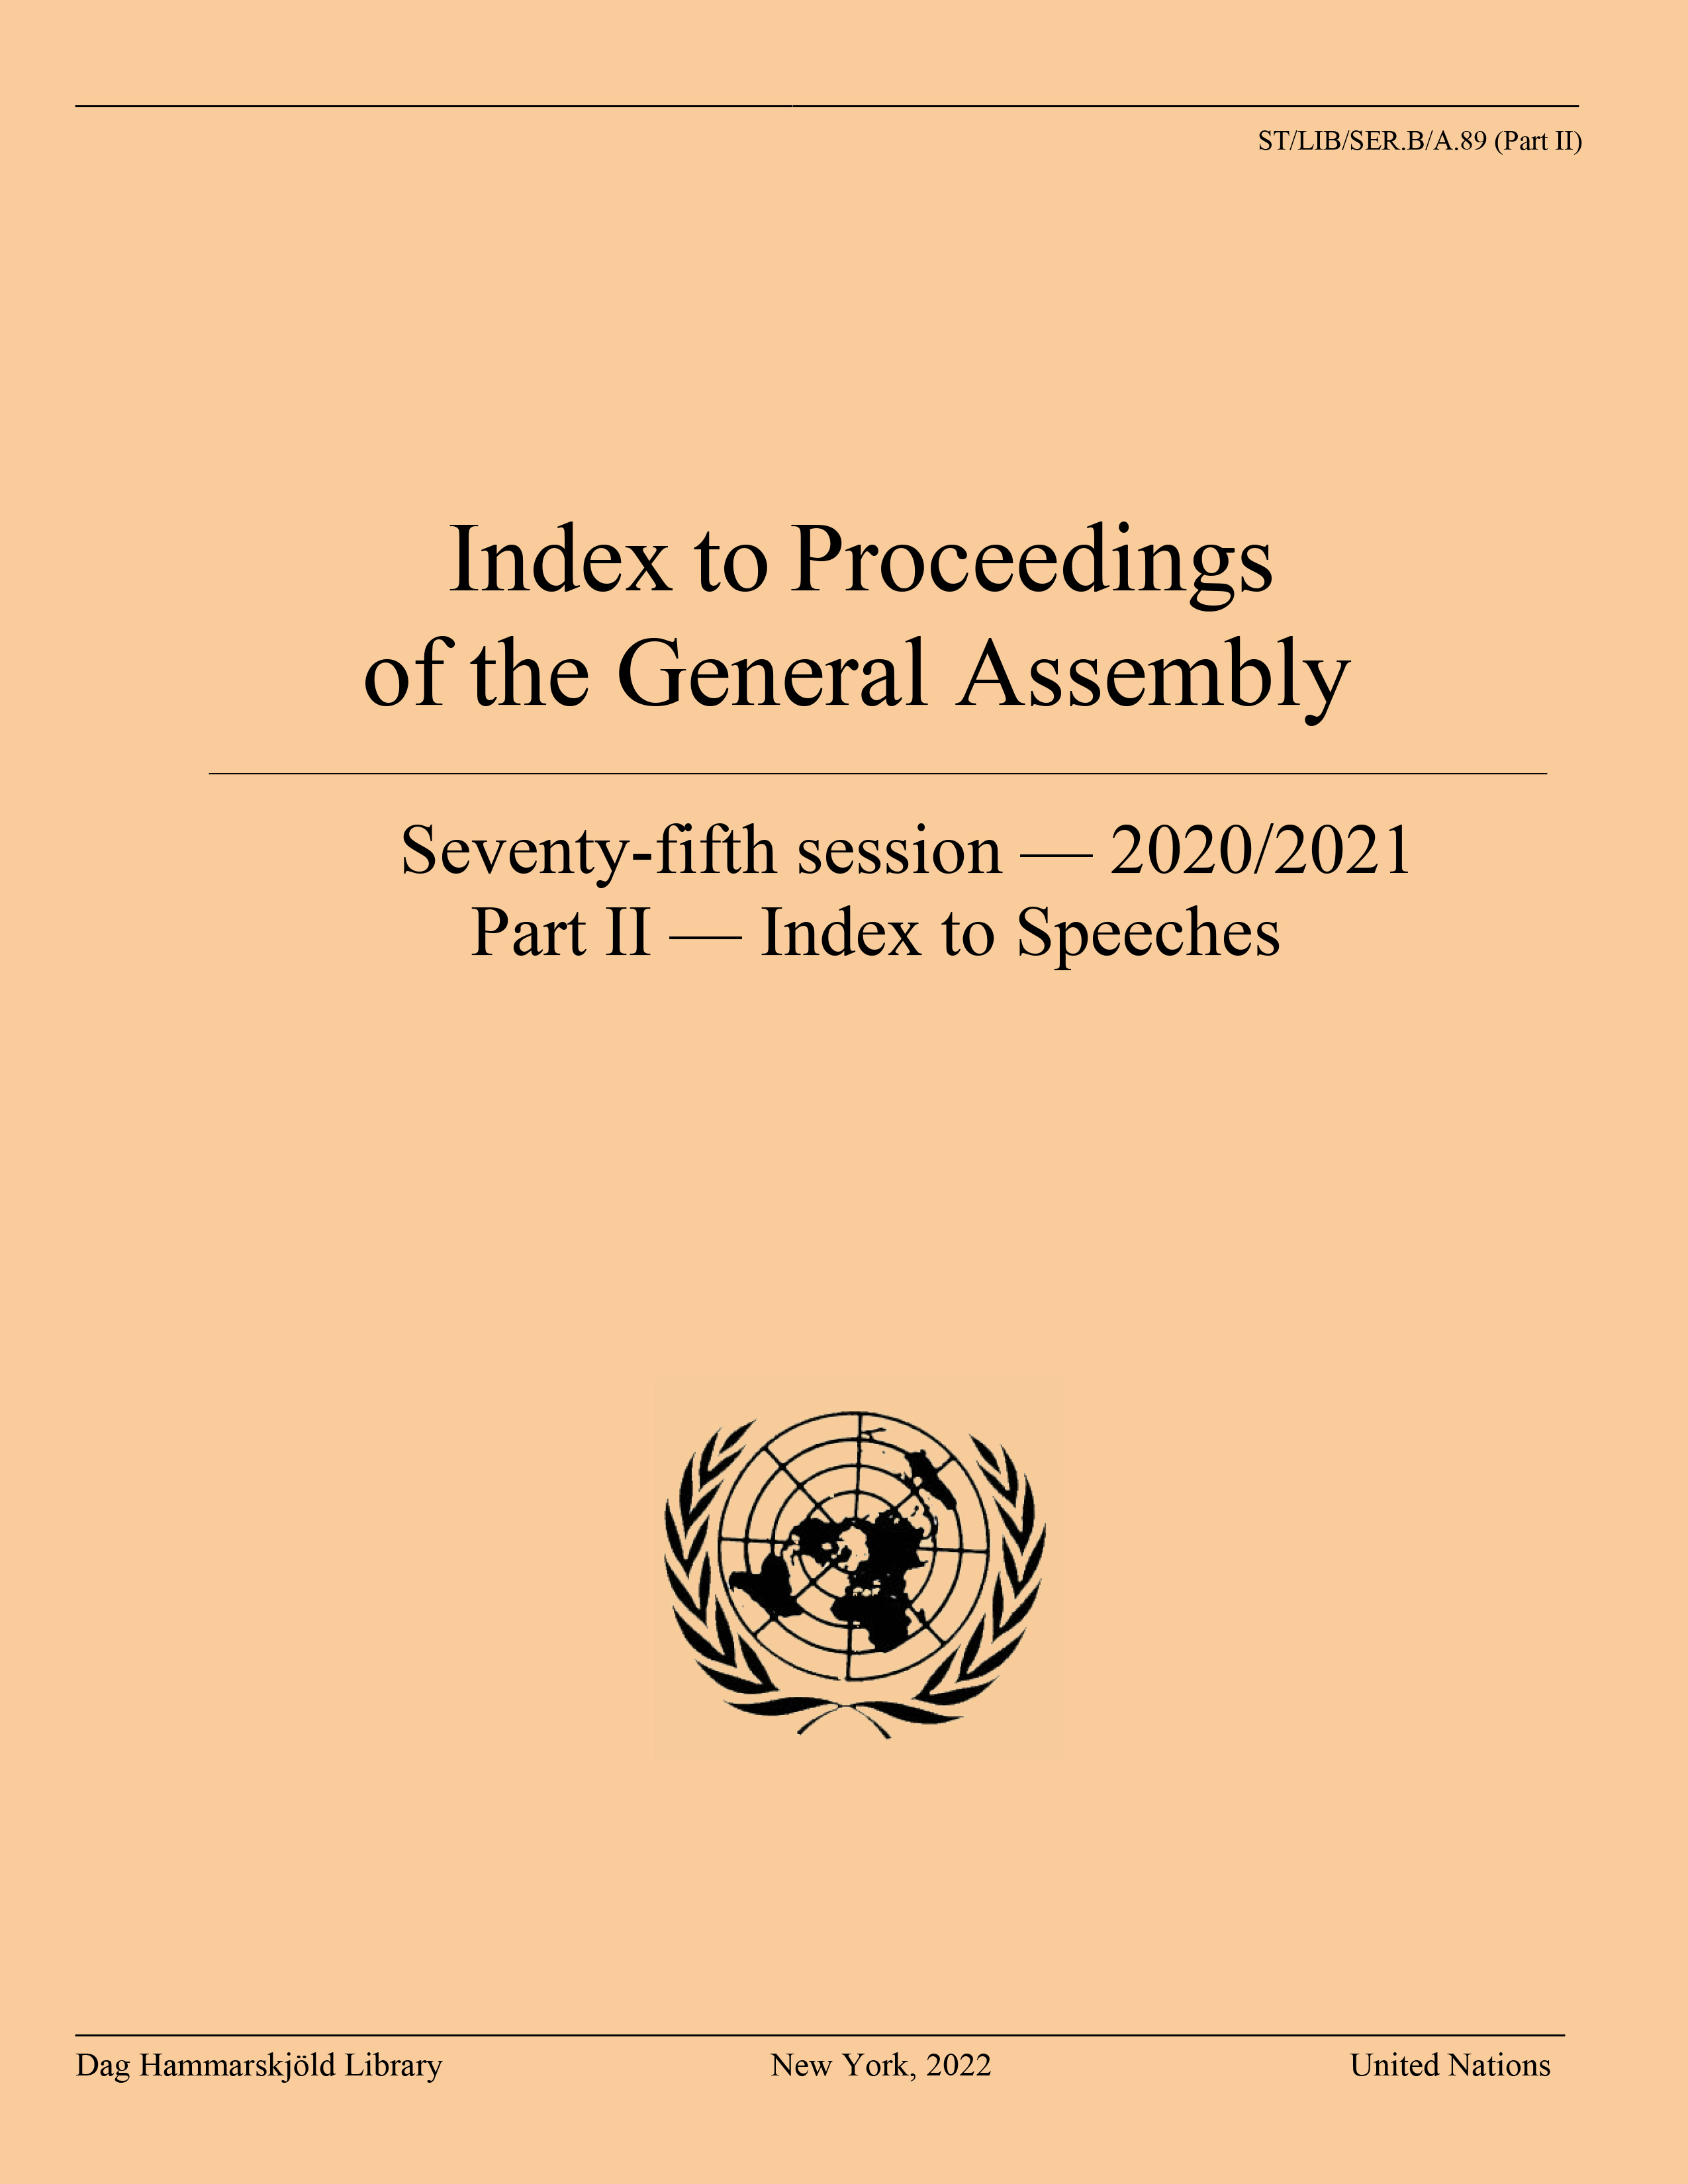 image of Index to Proceedings of the General Assembly 2020/2021